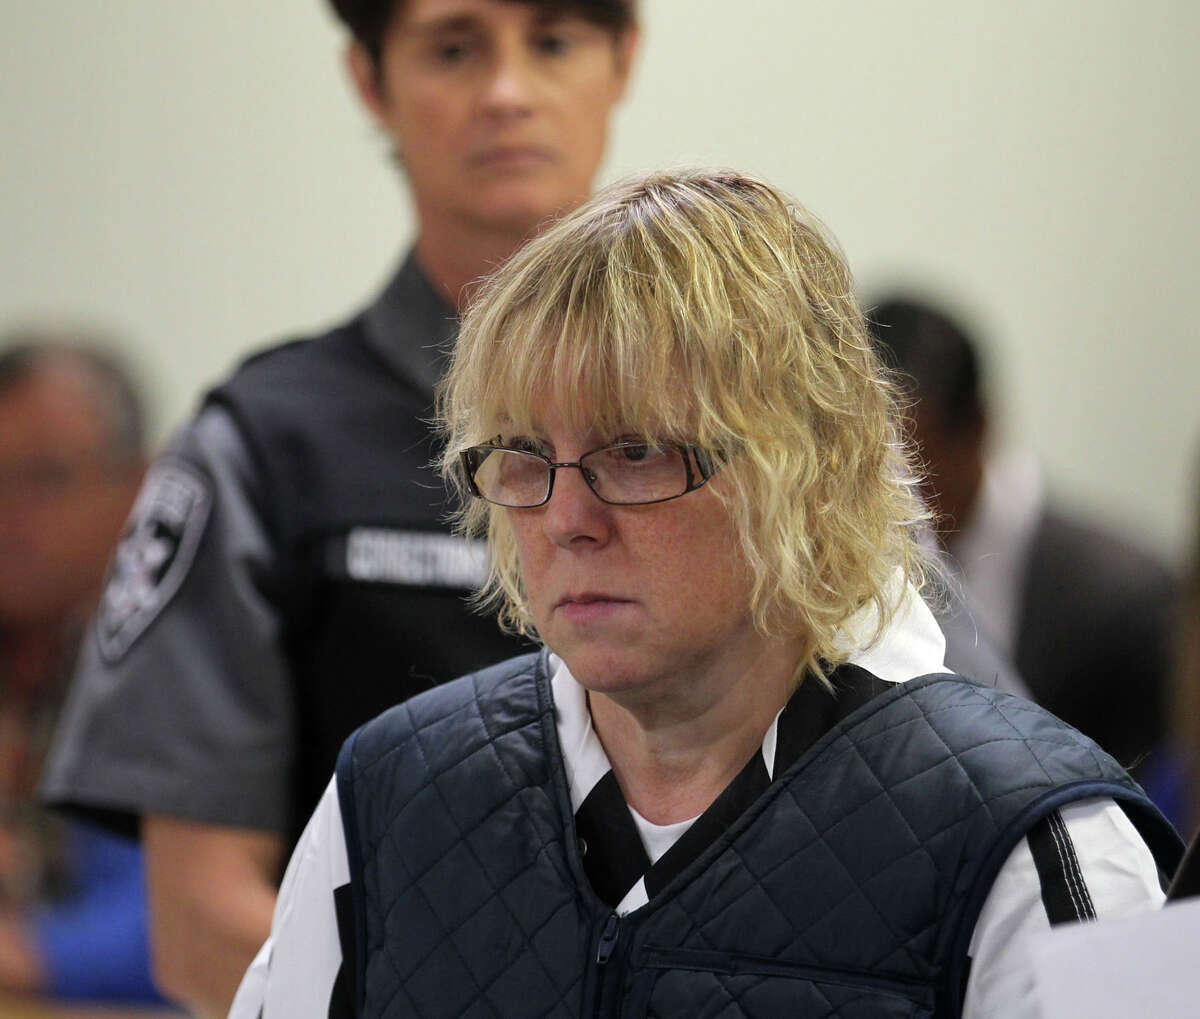 CORRECTS NAME OF JUDGE TO MARK ROGERS NOT BUCK ROGERS Joyce Mitchell appears before Judge Mark Rogers in Plattsburgh City Court, New York, for a hearing Monday, June 15, 2015. She is charged with helping Richard Matt and David Sweat escape from the Clinton Correctional Facility near the Canadian border on June 6. Mitchell, 51, was charged Friday with supplying hacksaw blades, chisels, a punch and a screwdriver. Her lawyer entered a not guilty plea on her behalf. (G.N. Miller/NY Post via AP, Pool) ORG XMIT: NYNYP104